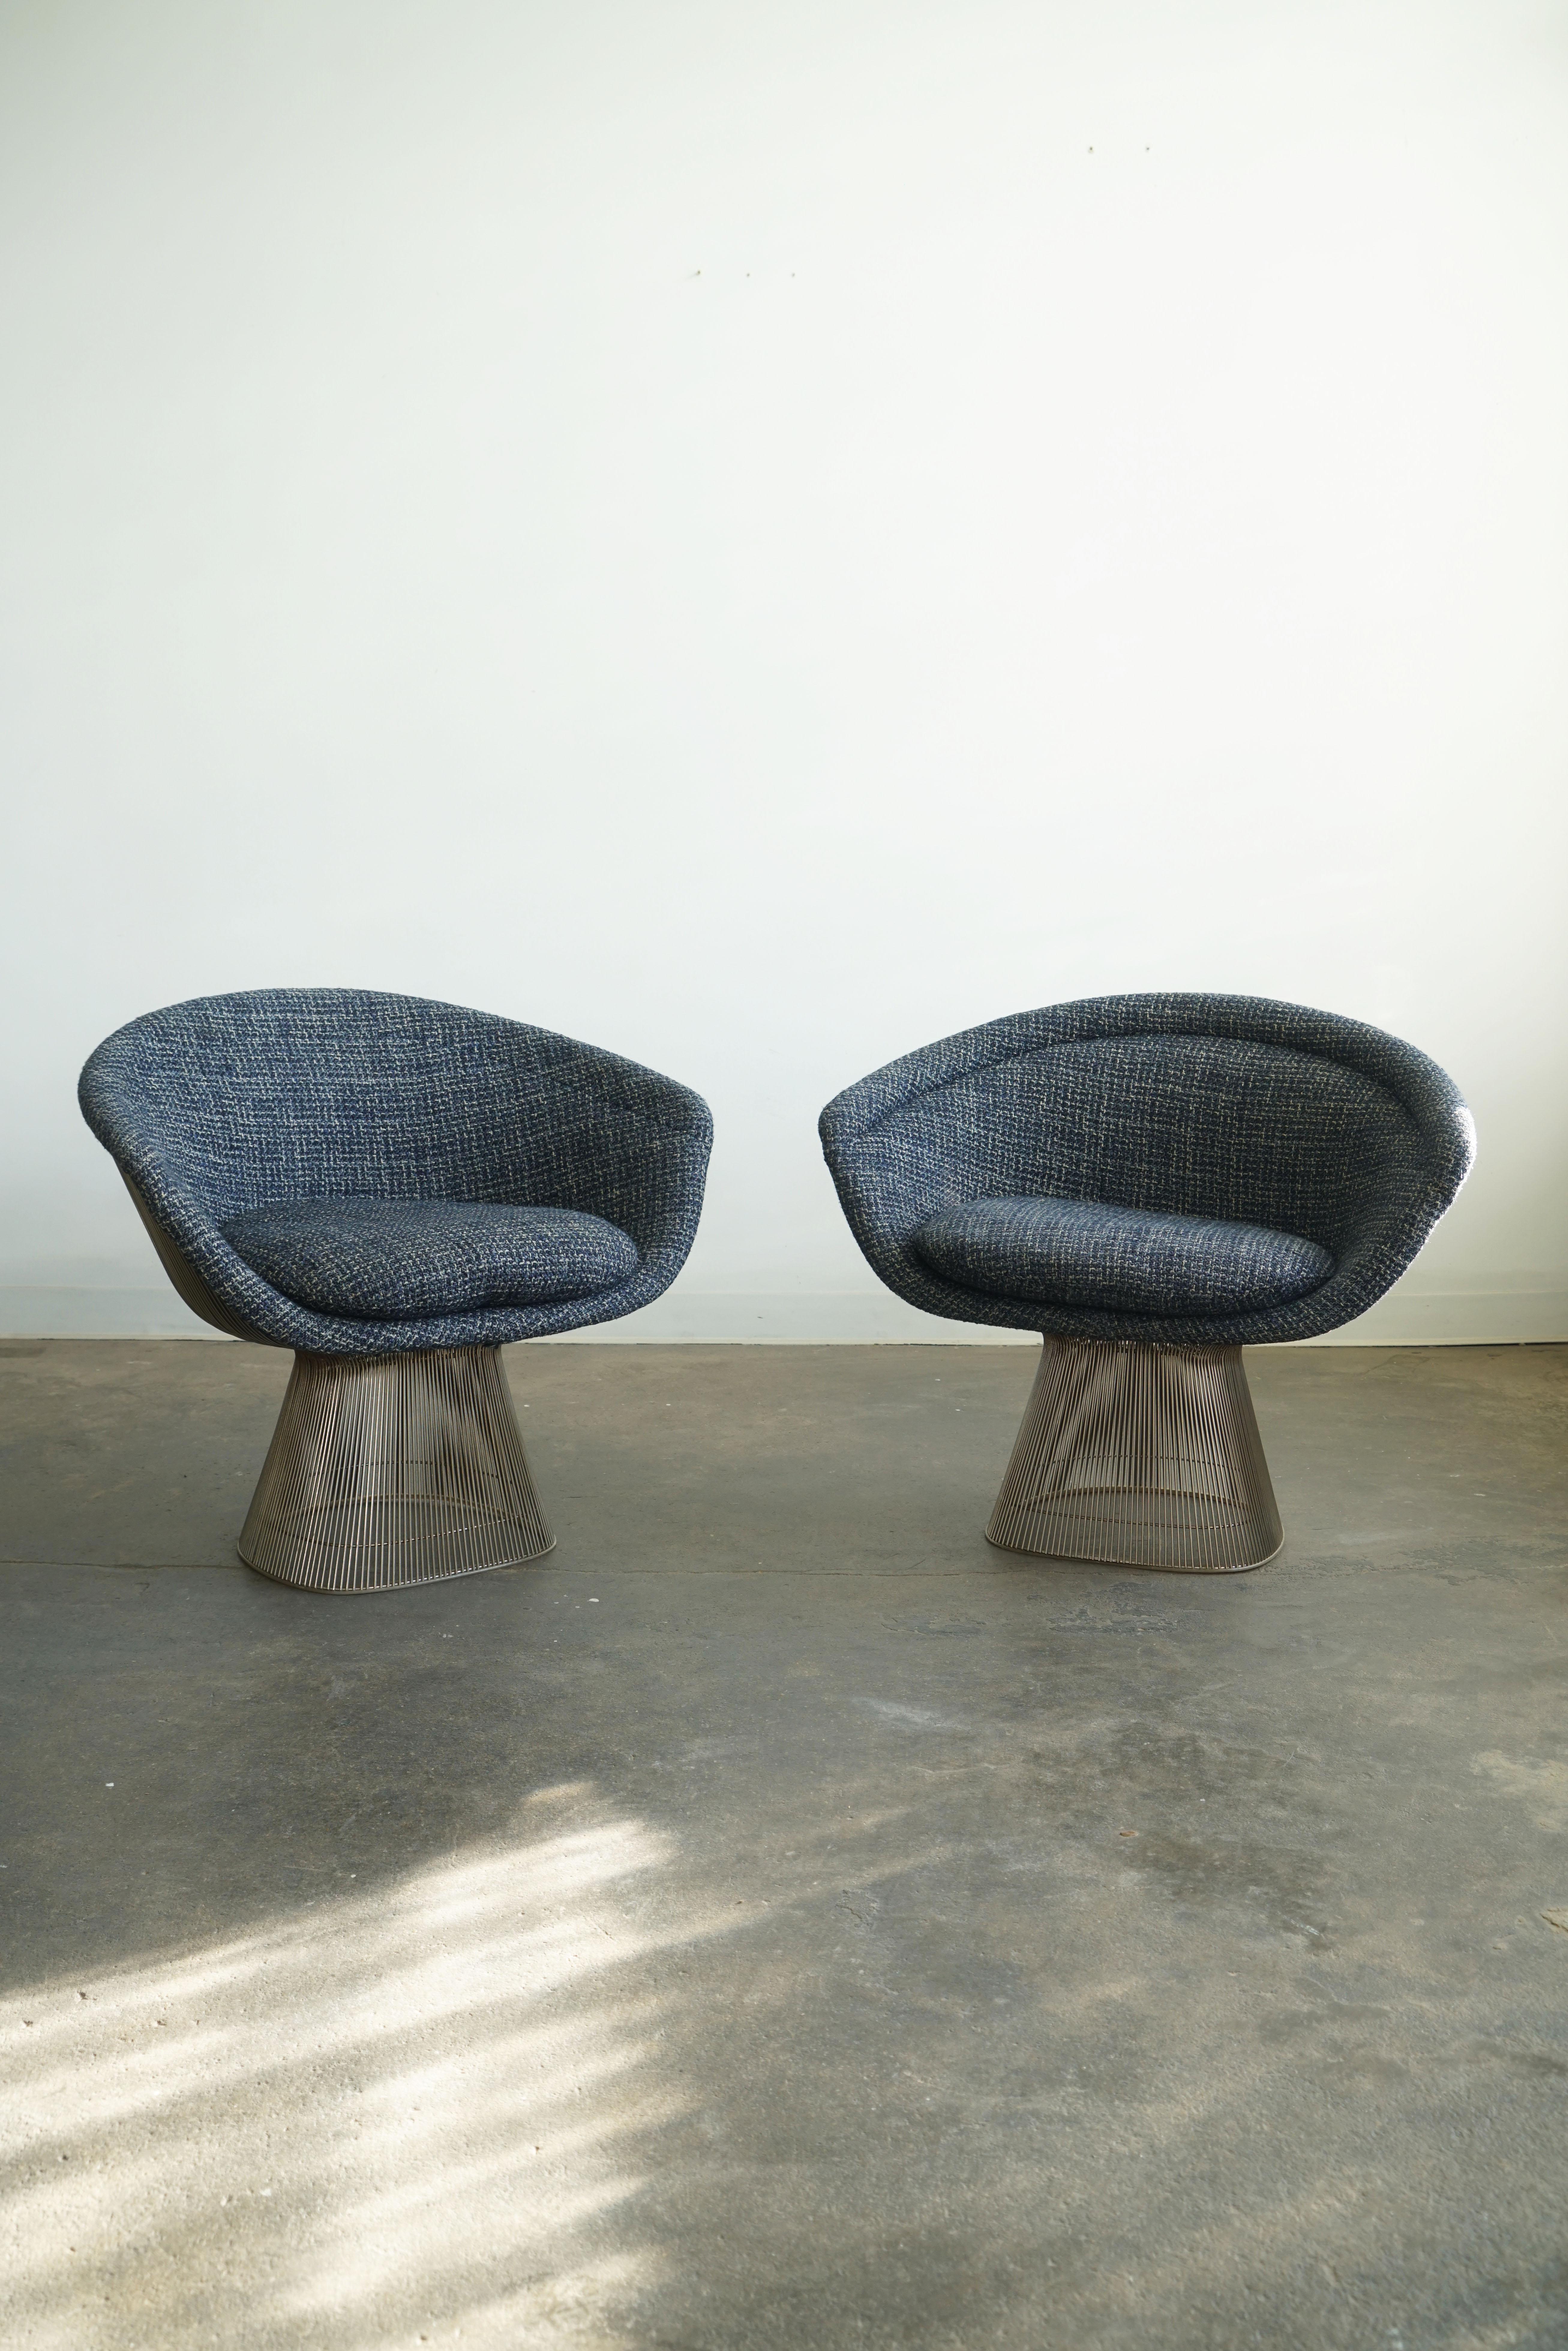 Pair of Warren Platner Lounge Chairs for Knoll International.
Blue upholstery, nickel frame.
Earlier editions. 

The Platner Collection (1966) reflects his belief that there’s room in modernism “for the kind of decorative, gentle, graceful design